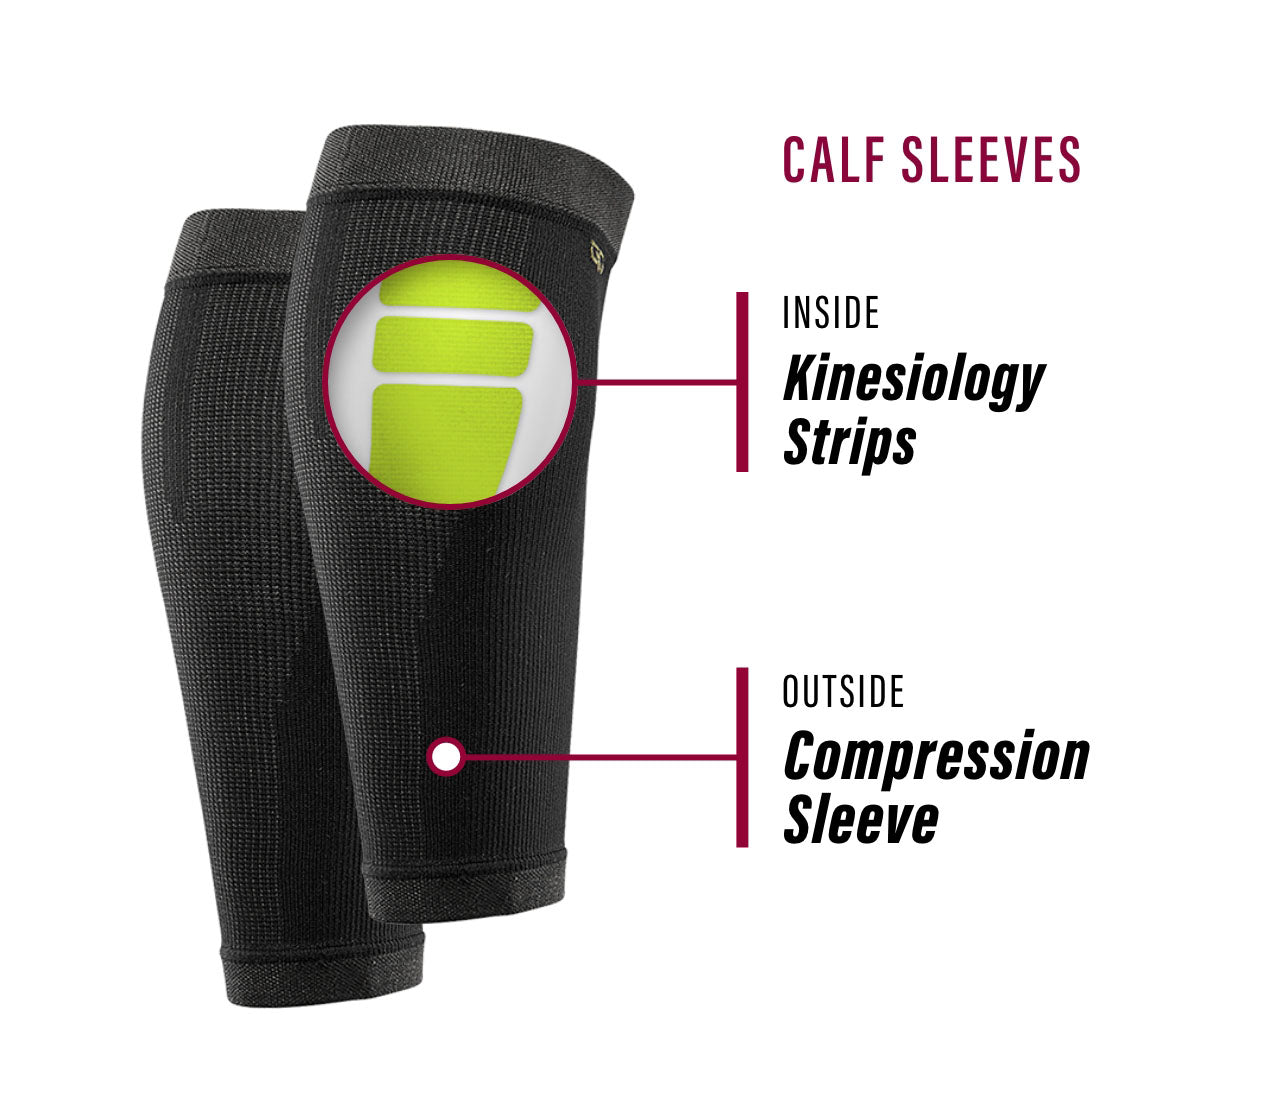 Testing New Calf Sleeves From GO Sleeve